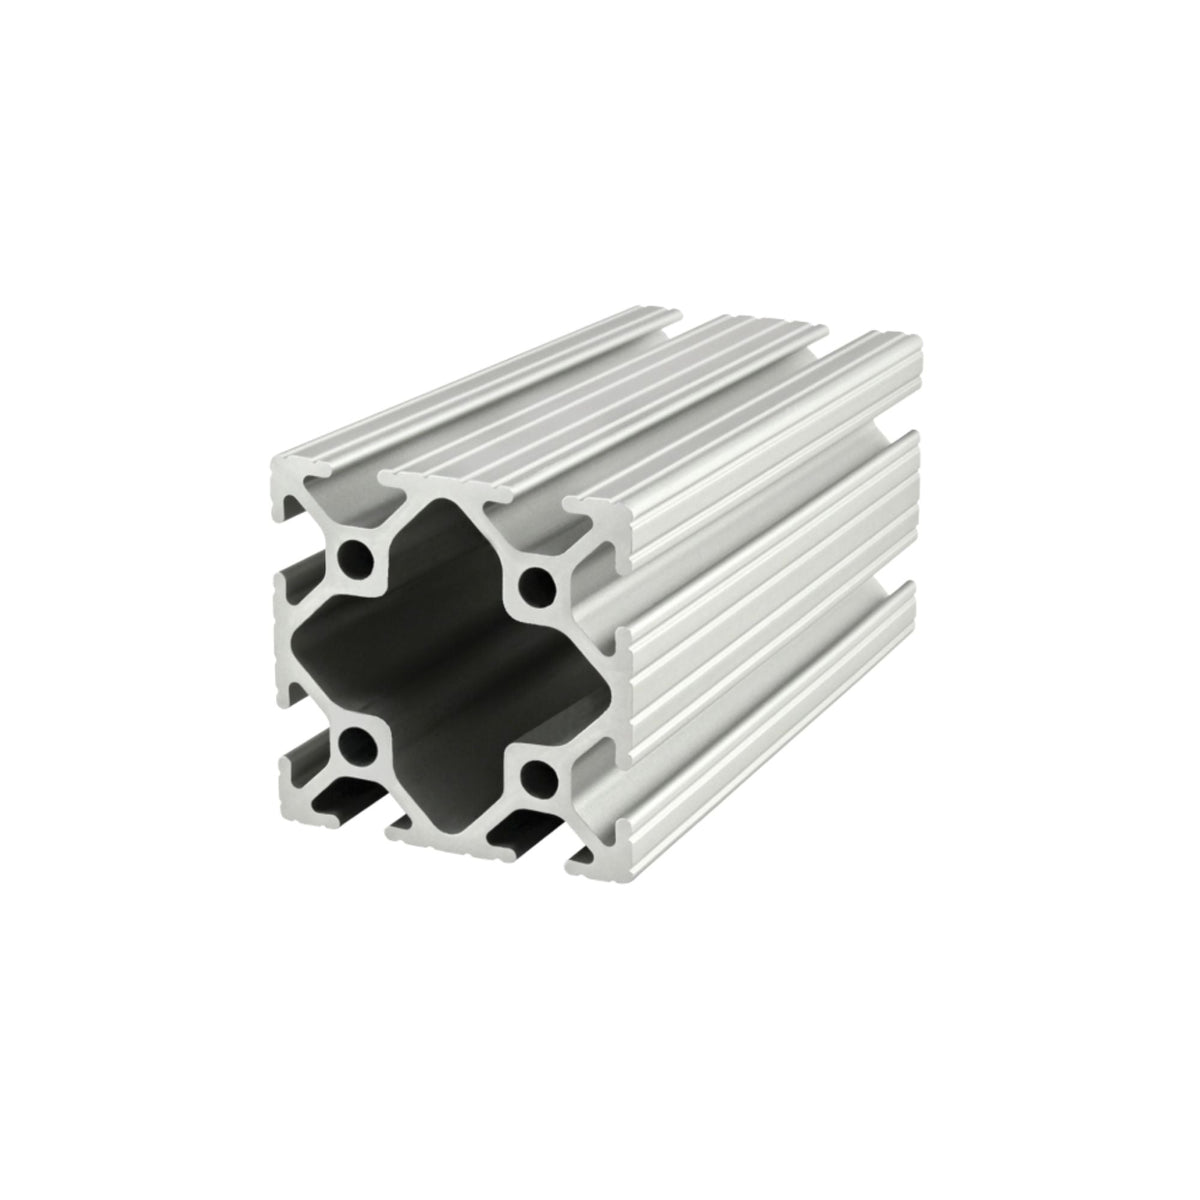 metal squared 80/20 bar with two T-slots along each side